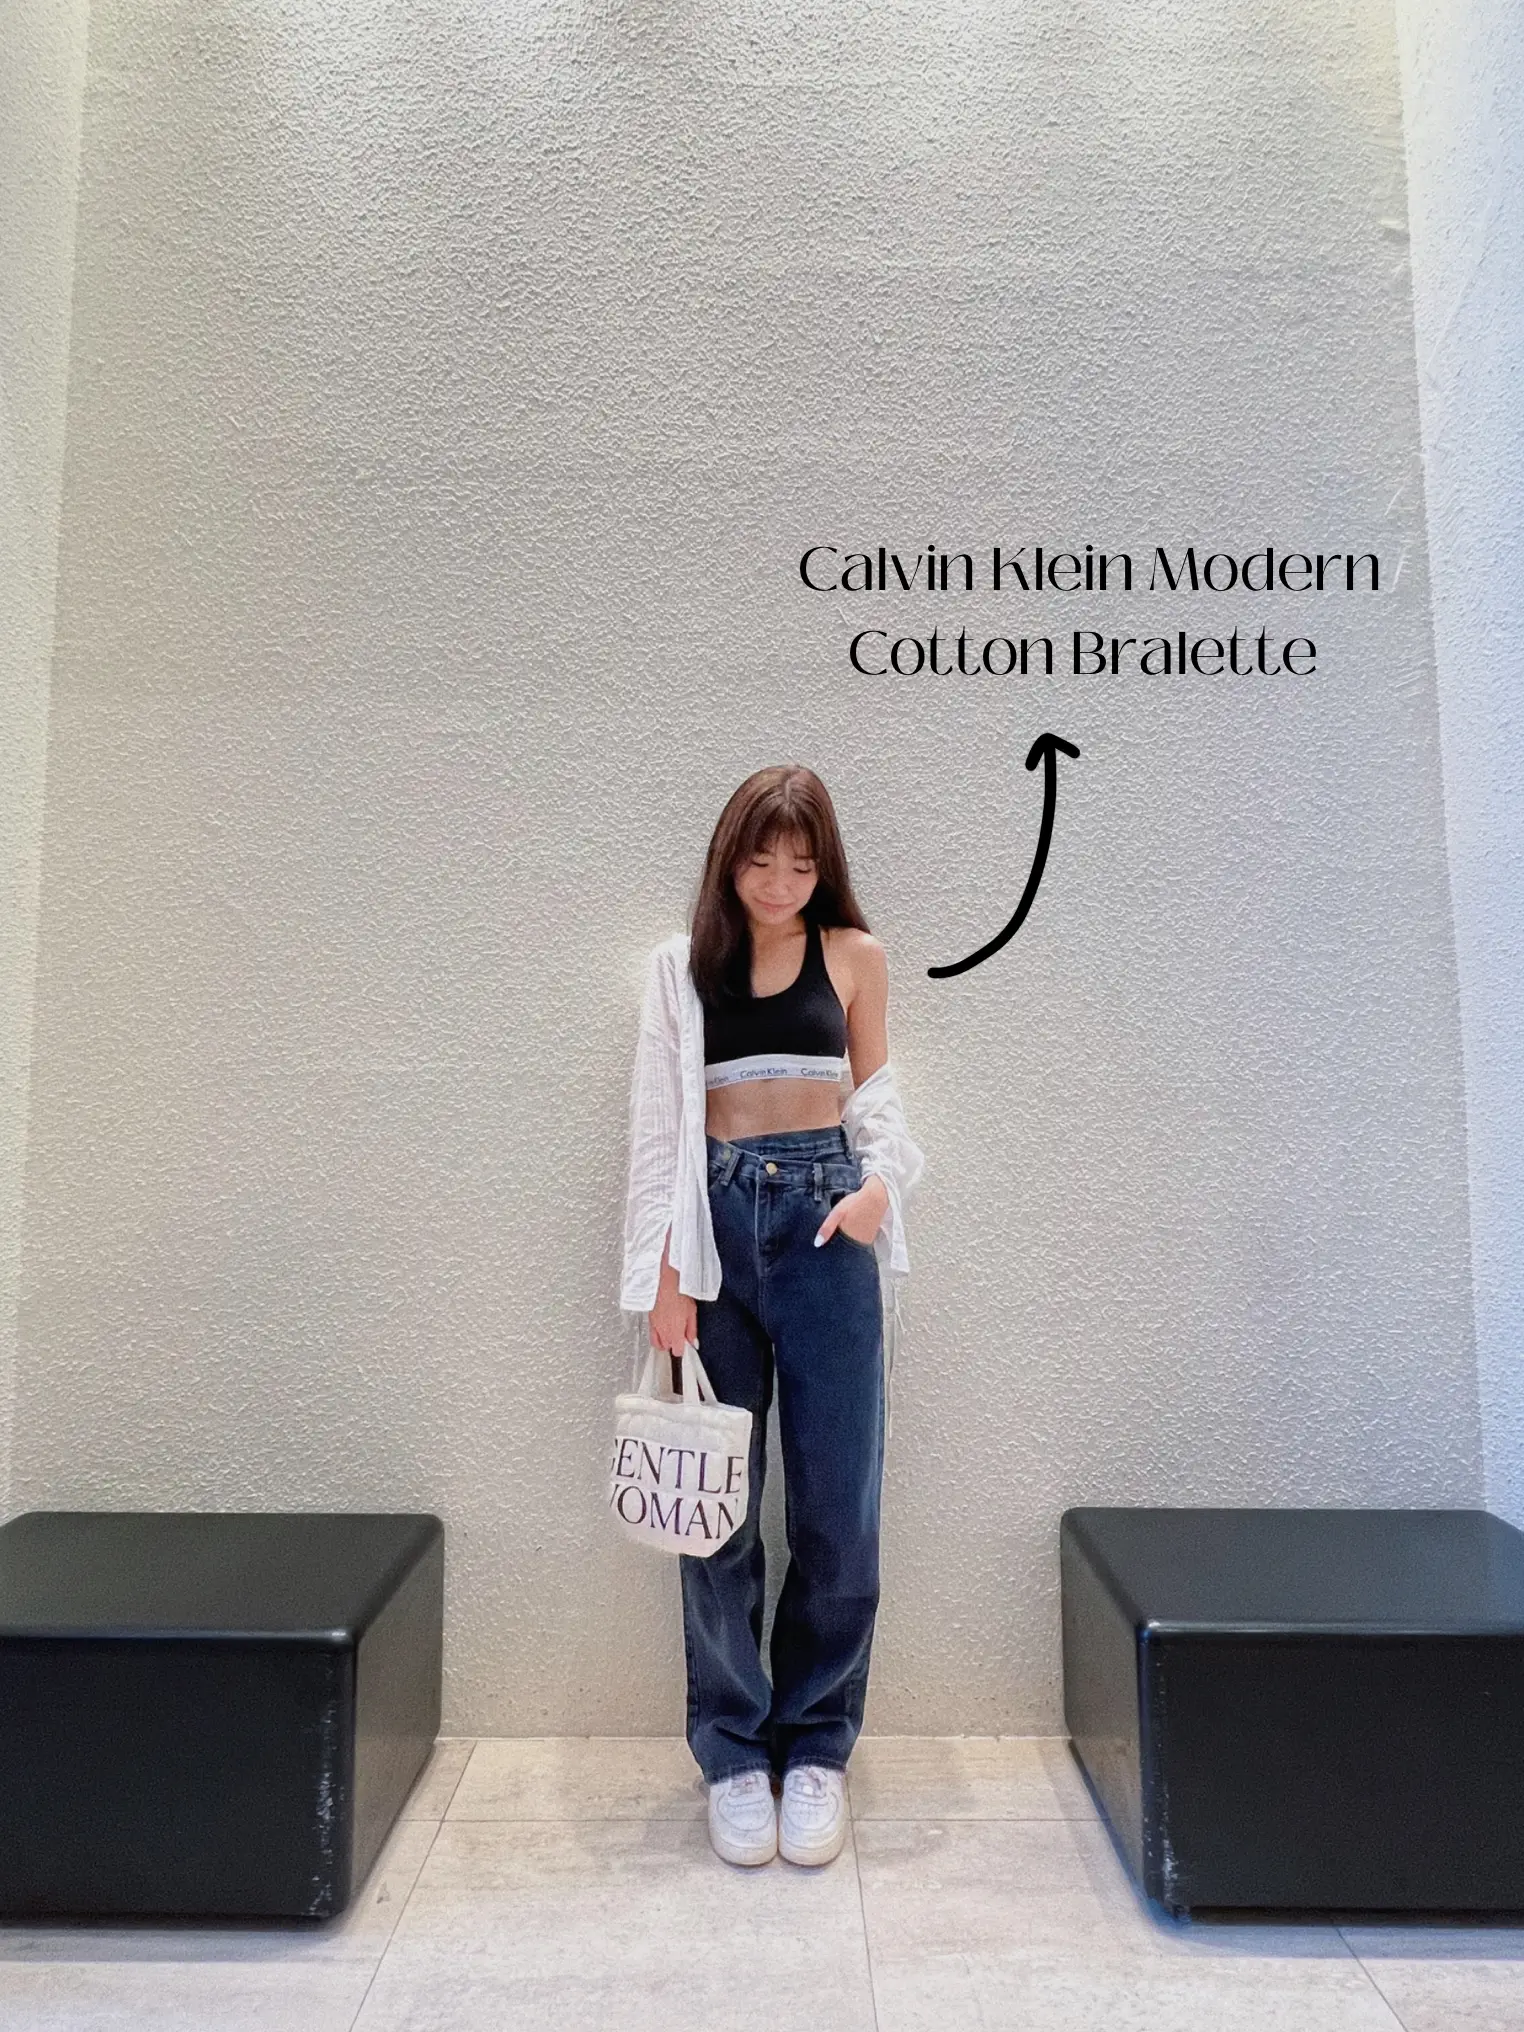 The perfect baggy jeans 👌🏼👌🏼 Museum date ootd!